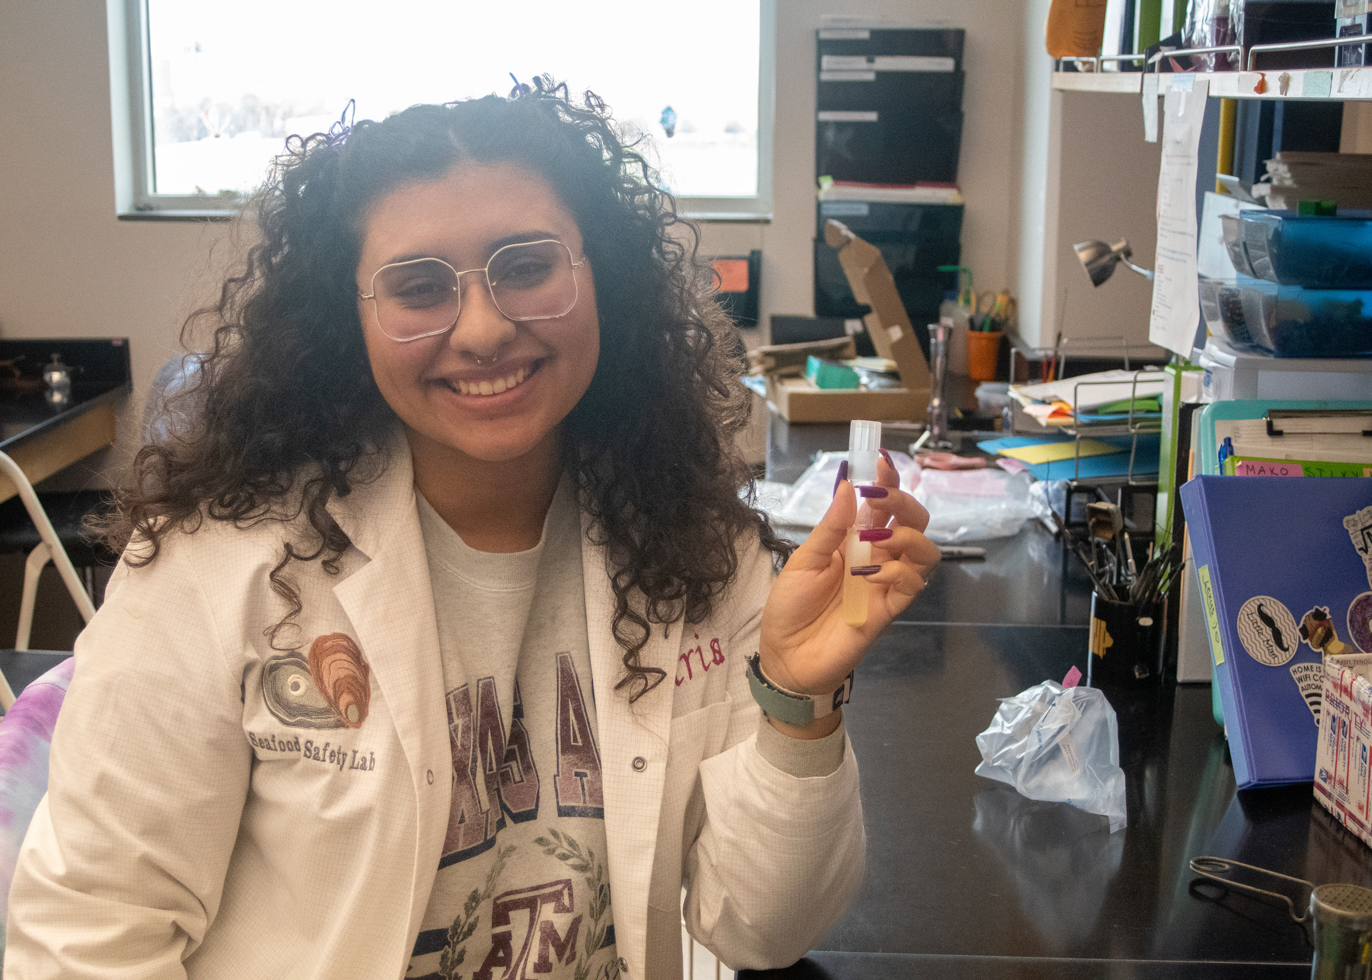 Marisa Gonzalez ‘24, an undergraduate student employee for the Seafood Safety Lab, poses with a sample in the lab.